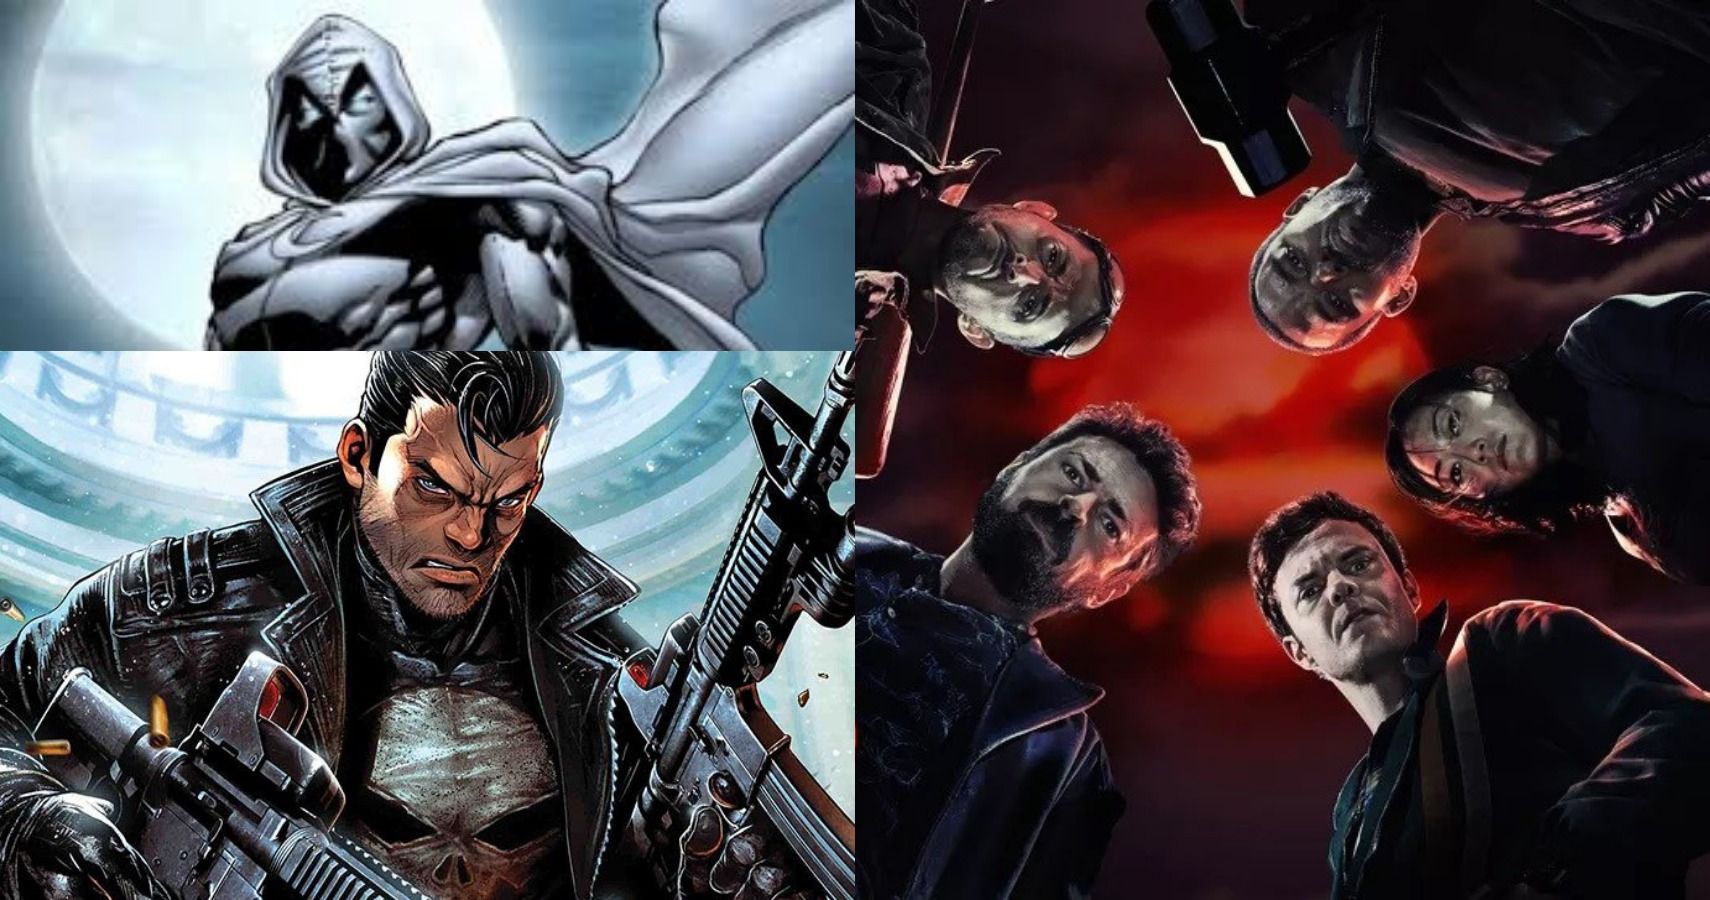 Moon Knight, The Punisher, and The Boys